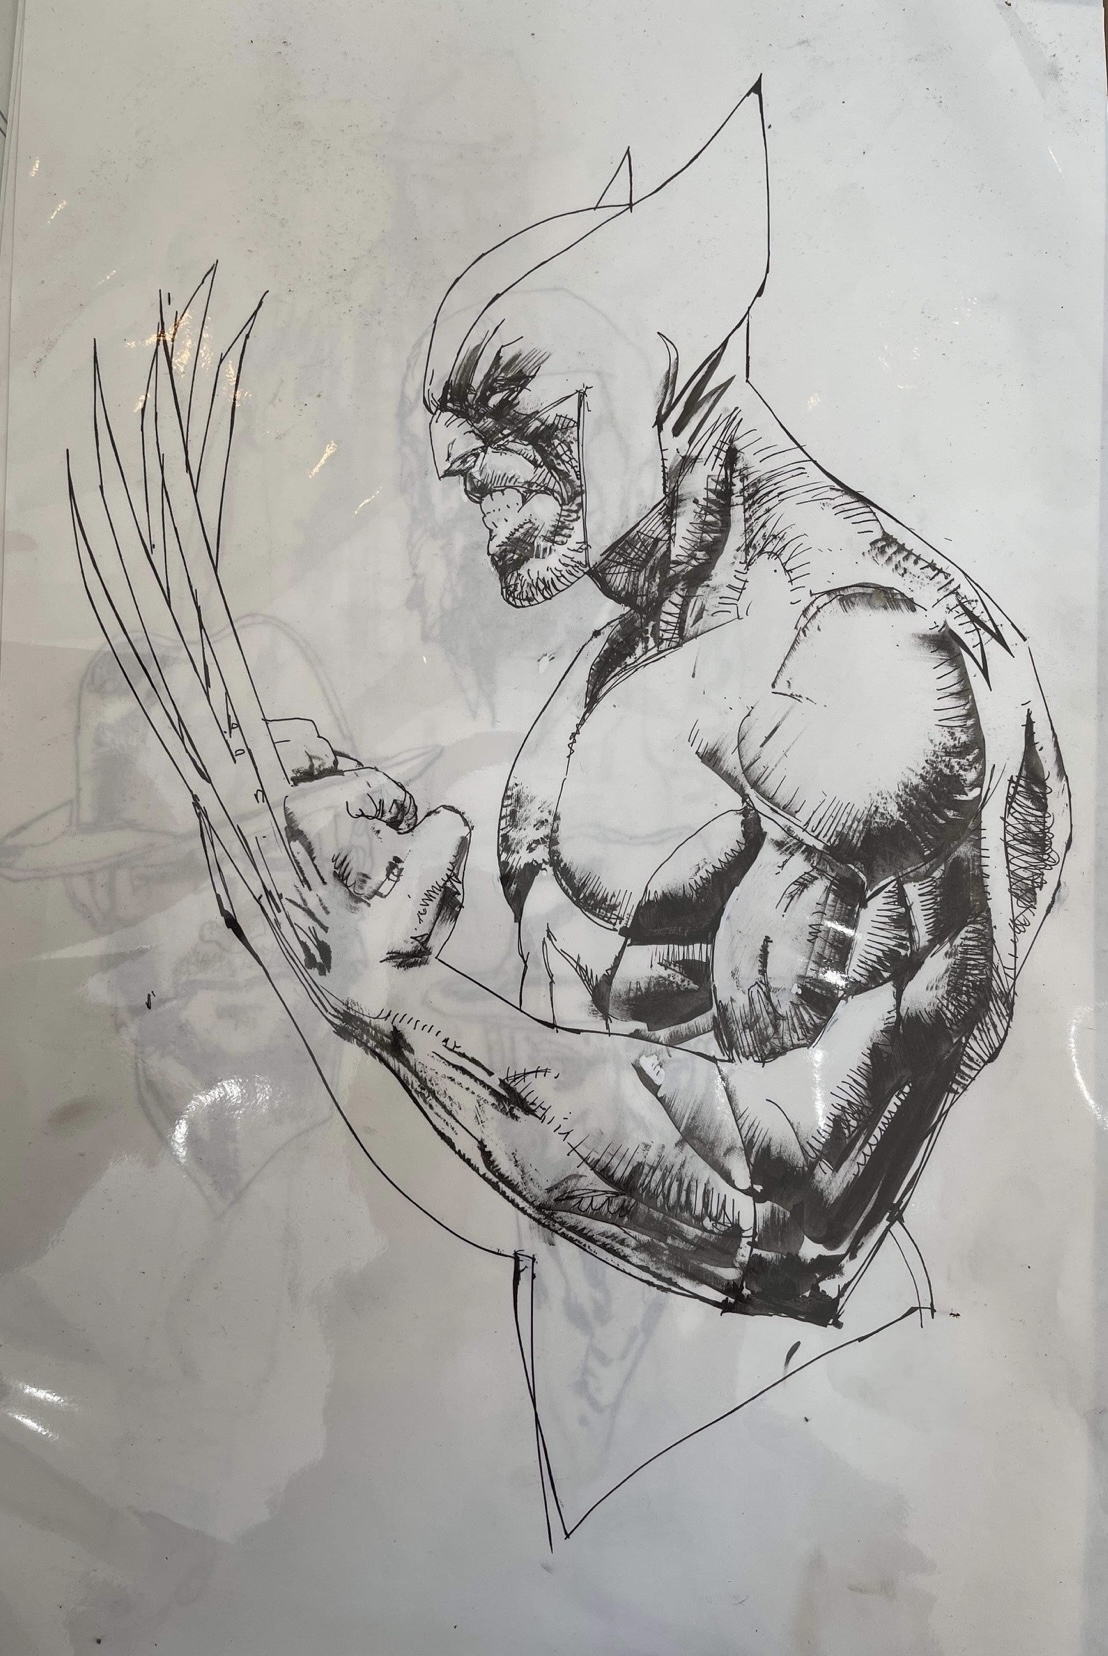 Hugh Jackman Pencil drawing as Wolverine by AtomiccircuS on DeviantArt